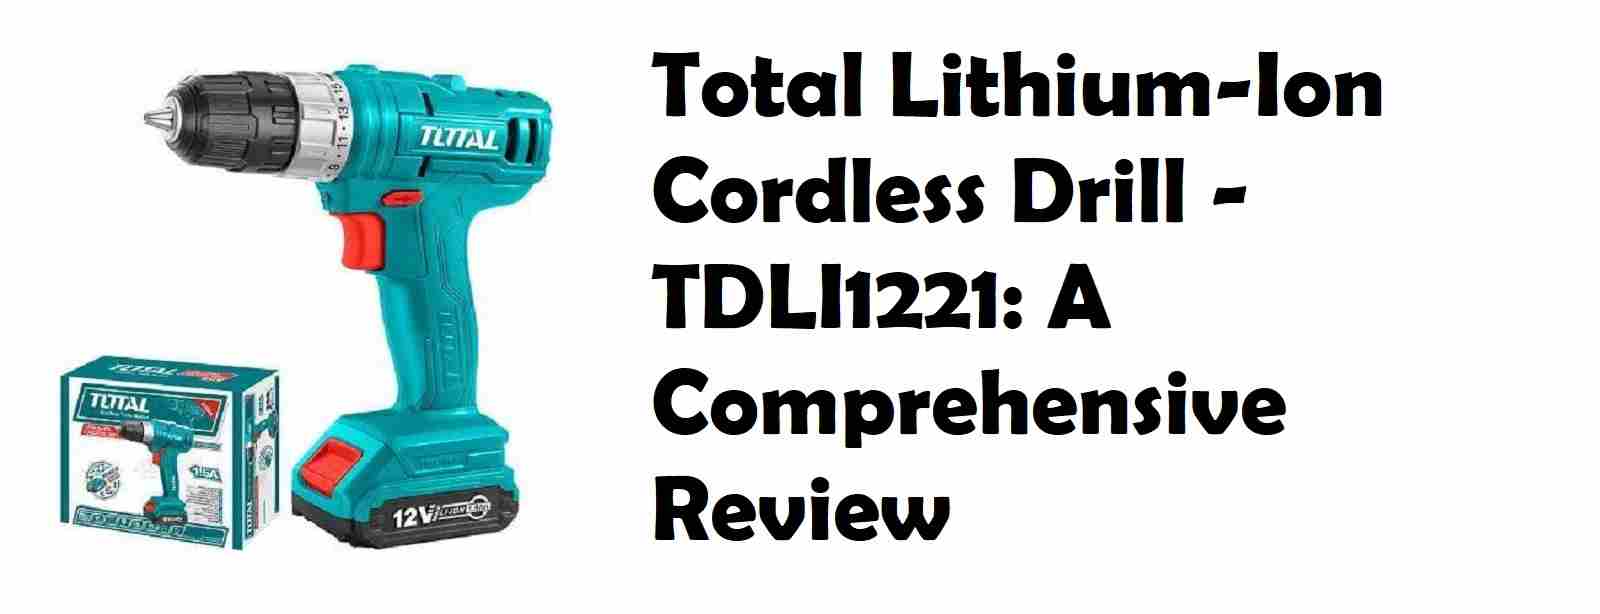 Total Lithium-Ion Cordless Drill - TDLI1221 Review